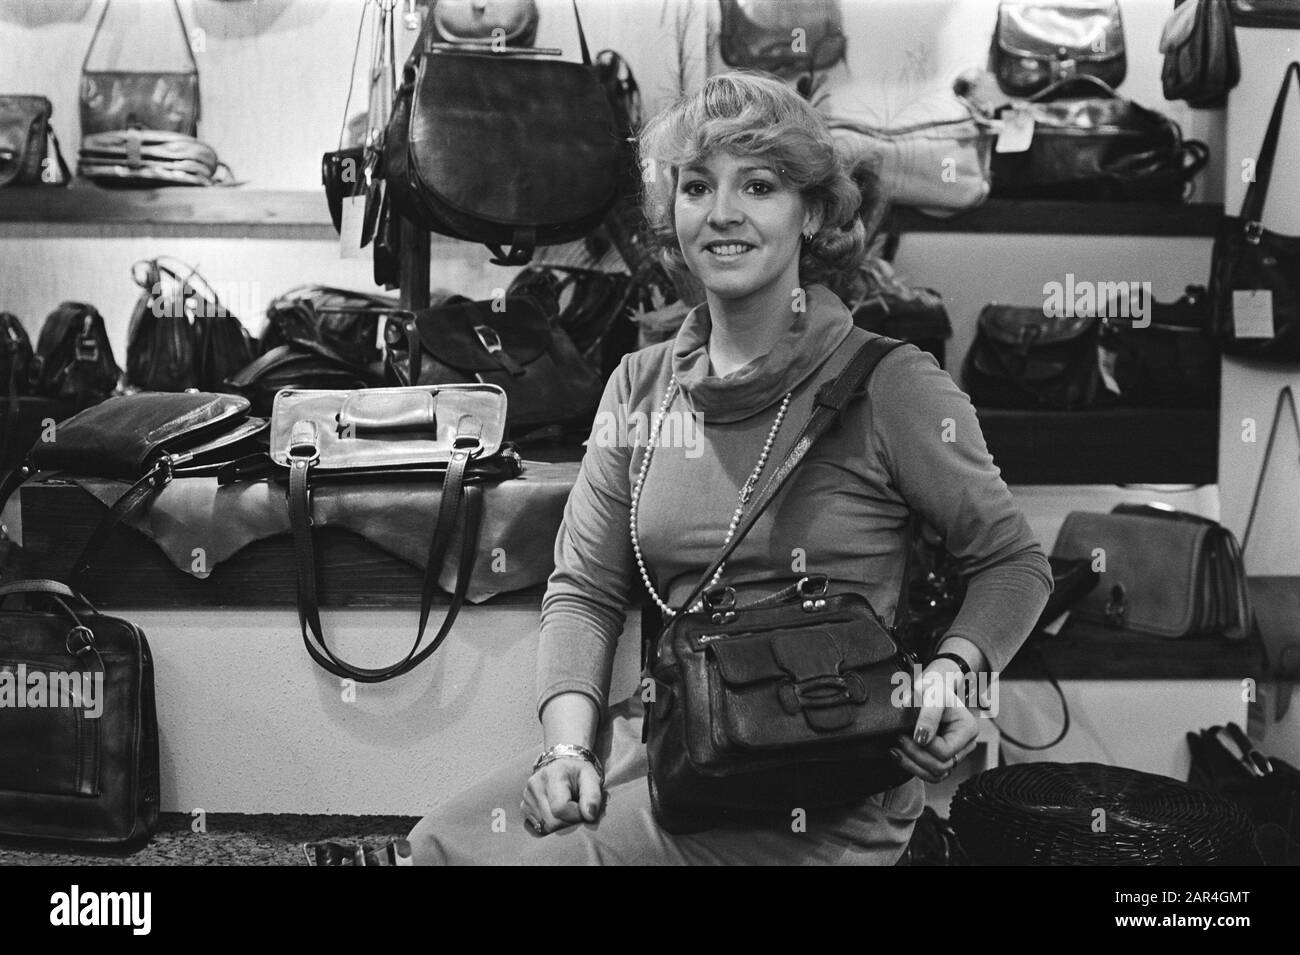 Trains destroyed by football supporters; woman with leather bag Date: 10 January 1977 Keywords: SUPPORTERS, sport, football, women Stock Photo